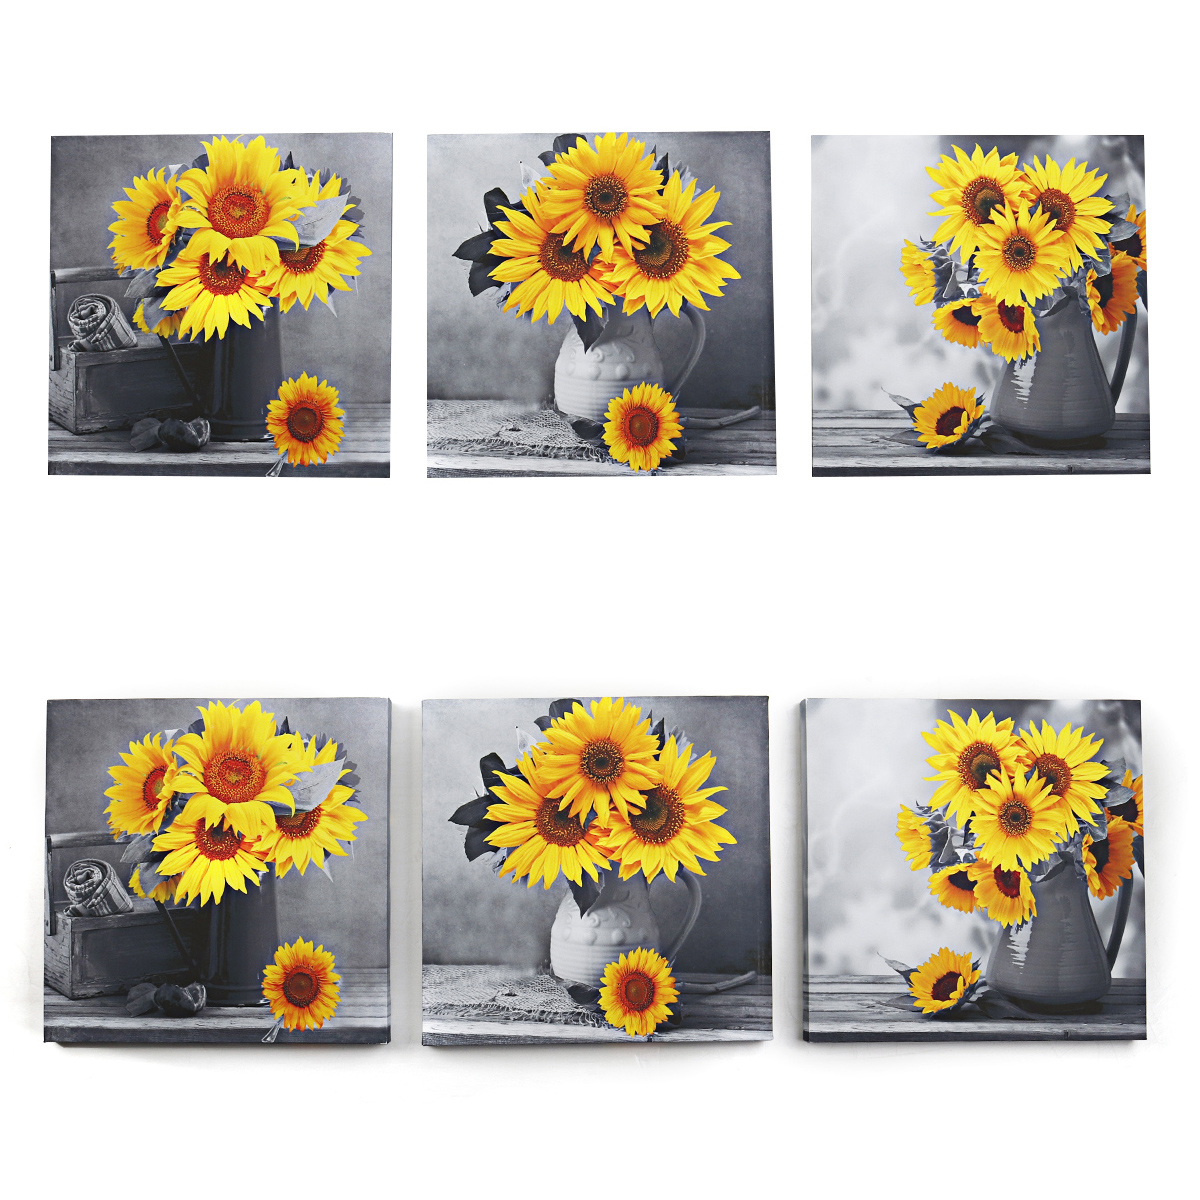 30303-cm-Sunflower-Wall-Art-Painting-Living-Room-Bedroom-Hanging-Canvas-Pictures-Office-Mural-Decora-1791798-5